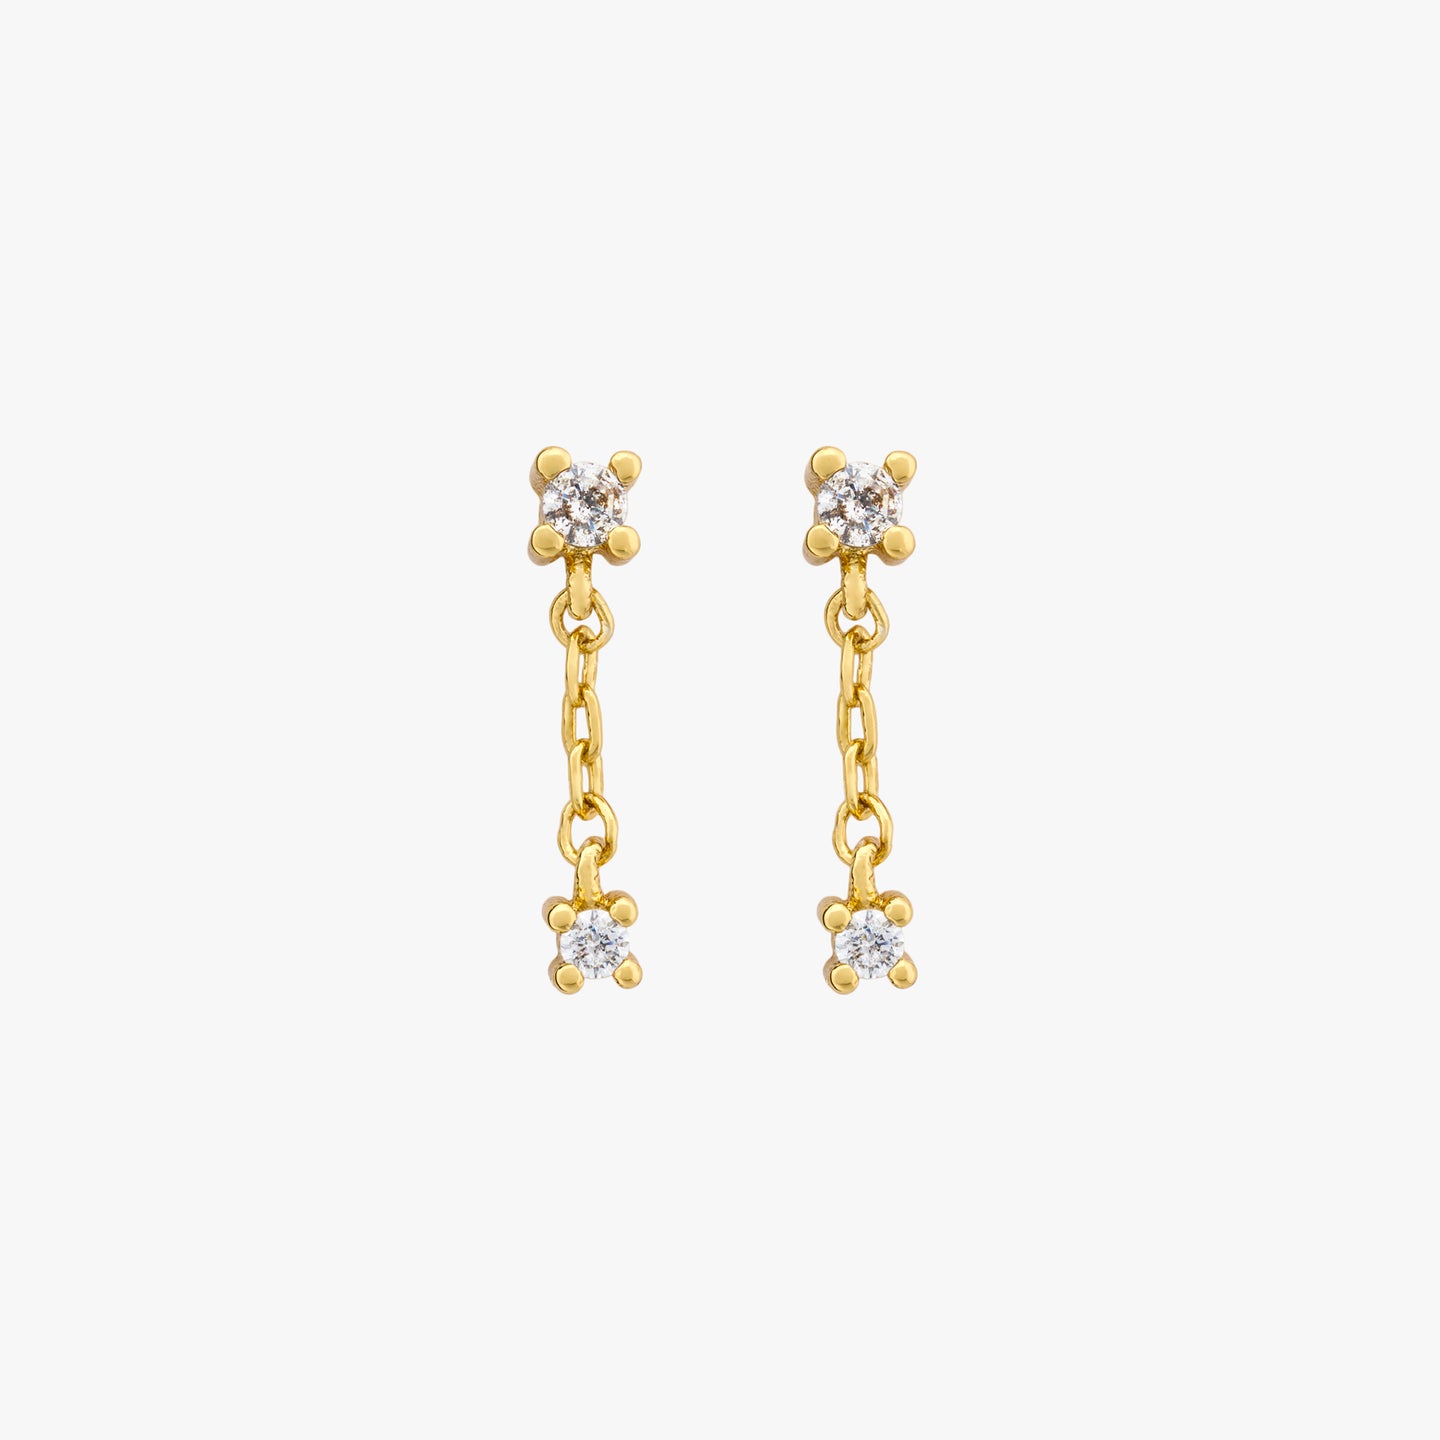 This is a pair of small cz studs with a dangling cz connected by a gold chain [pair] color:null|gold/clear